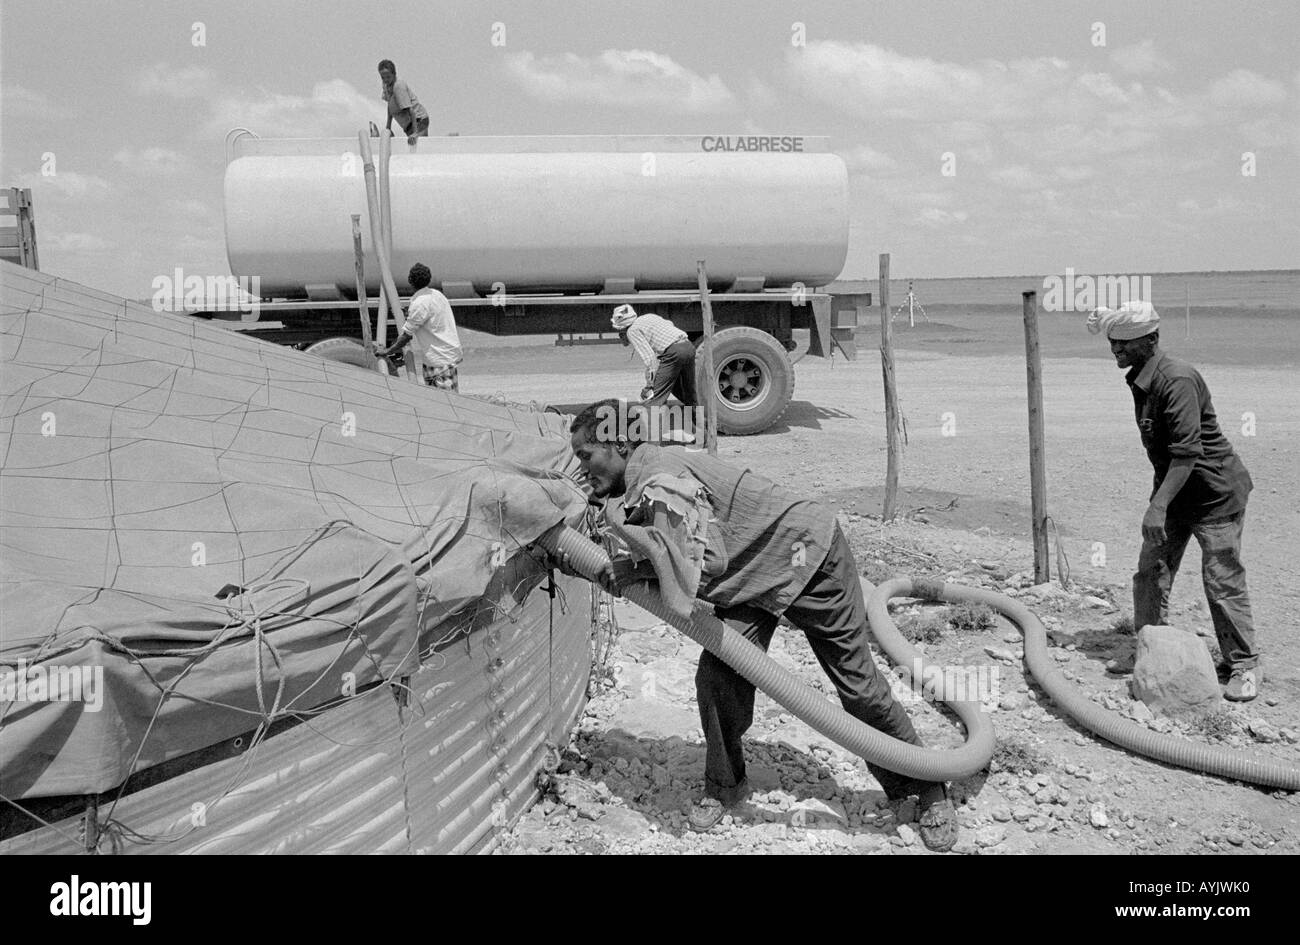 B/W of men filling a storage tank from a water tanker at a refugee camp for displaced Somalis on the border. Kebrebeyah, Ethiopia, Africa Stock Photo